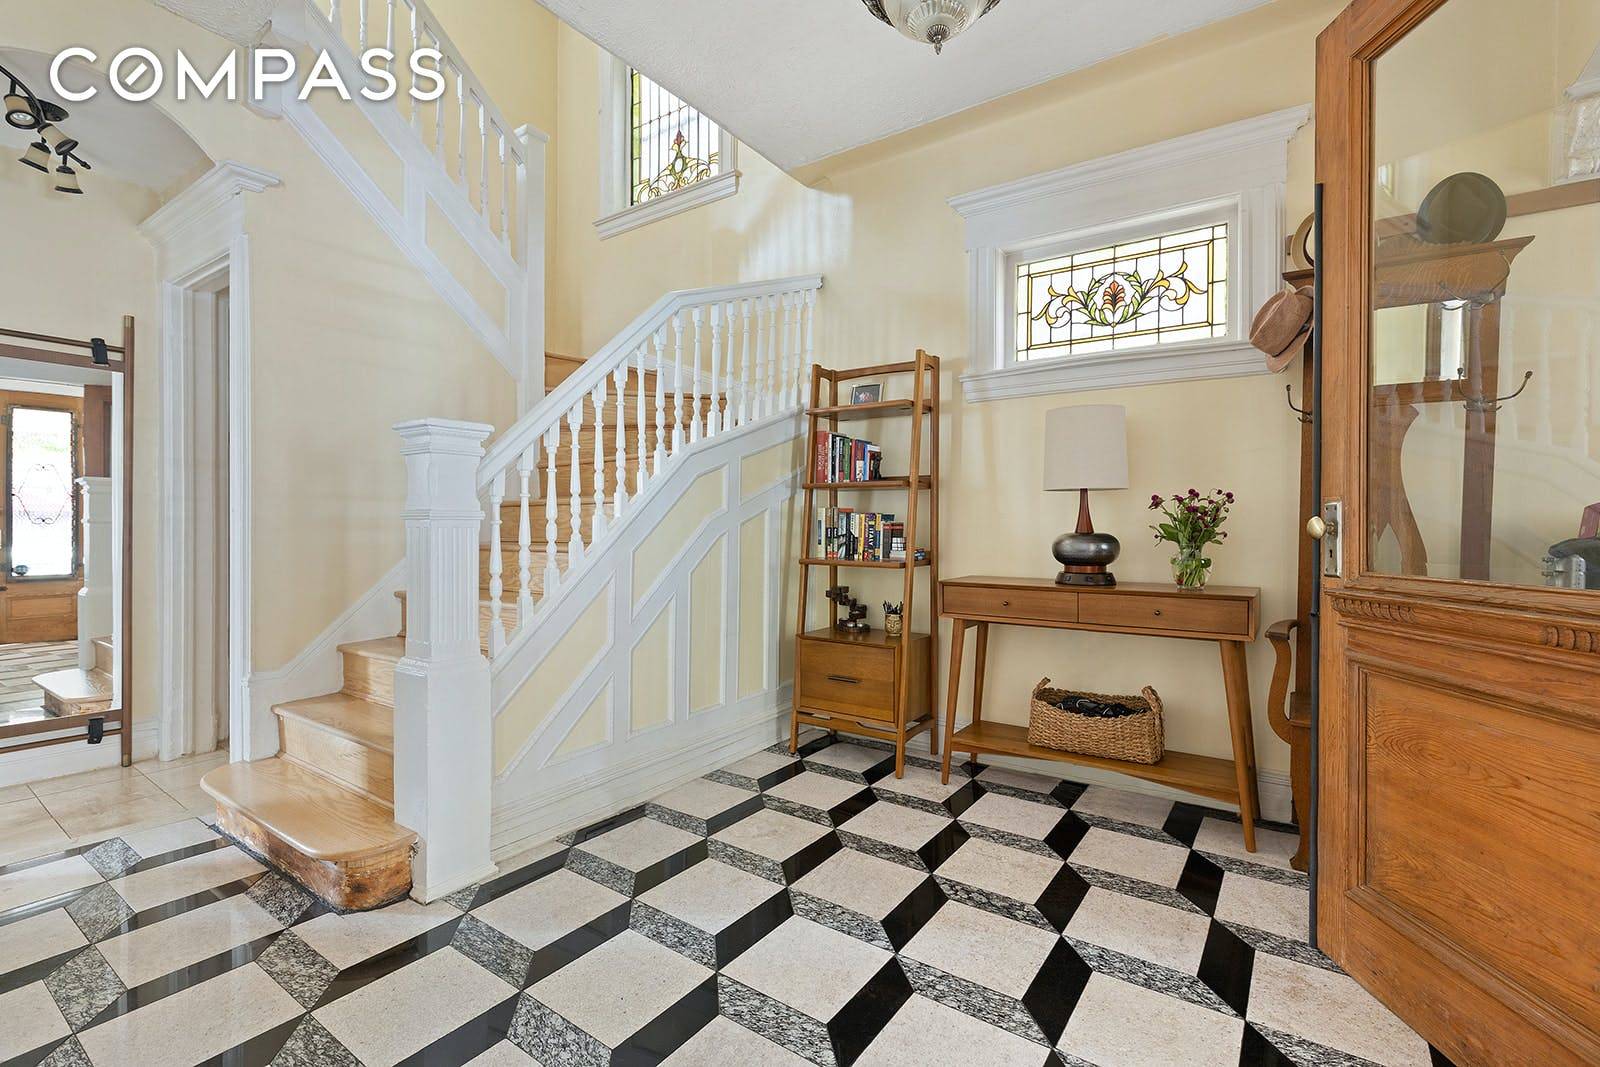 This lovely, detached Victorian home has over 2, 000 square feet of interior space and over 2, 000 square feet of outdoor space including parking for four vehicles.